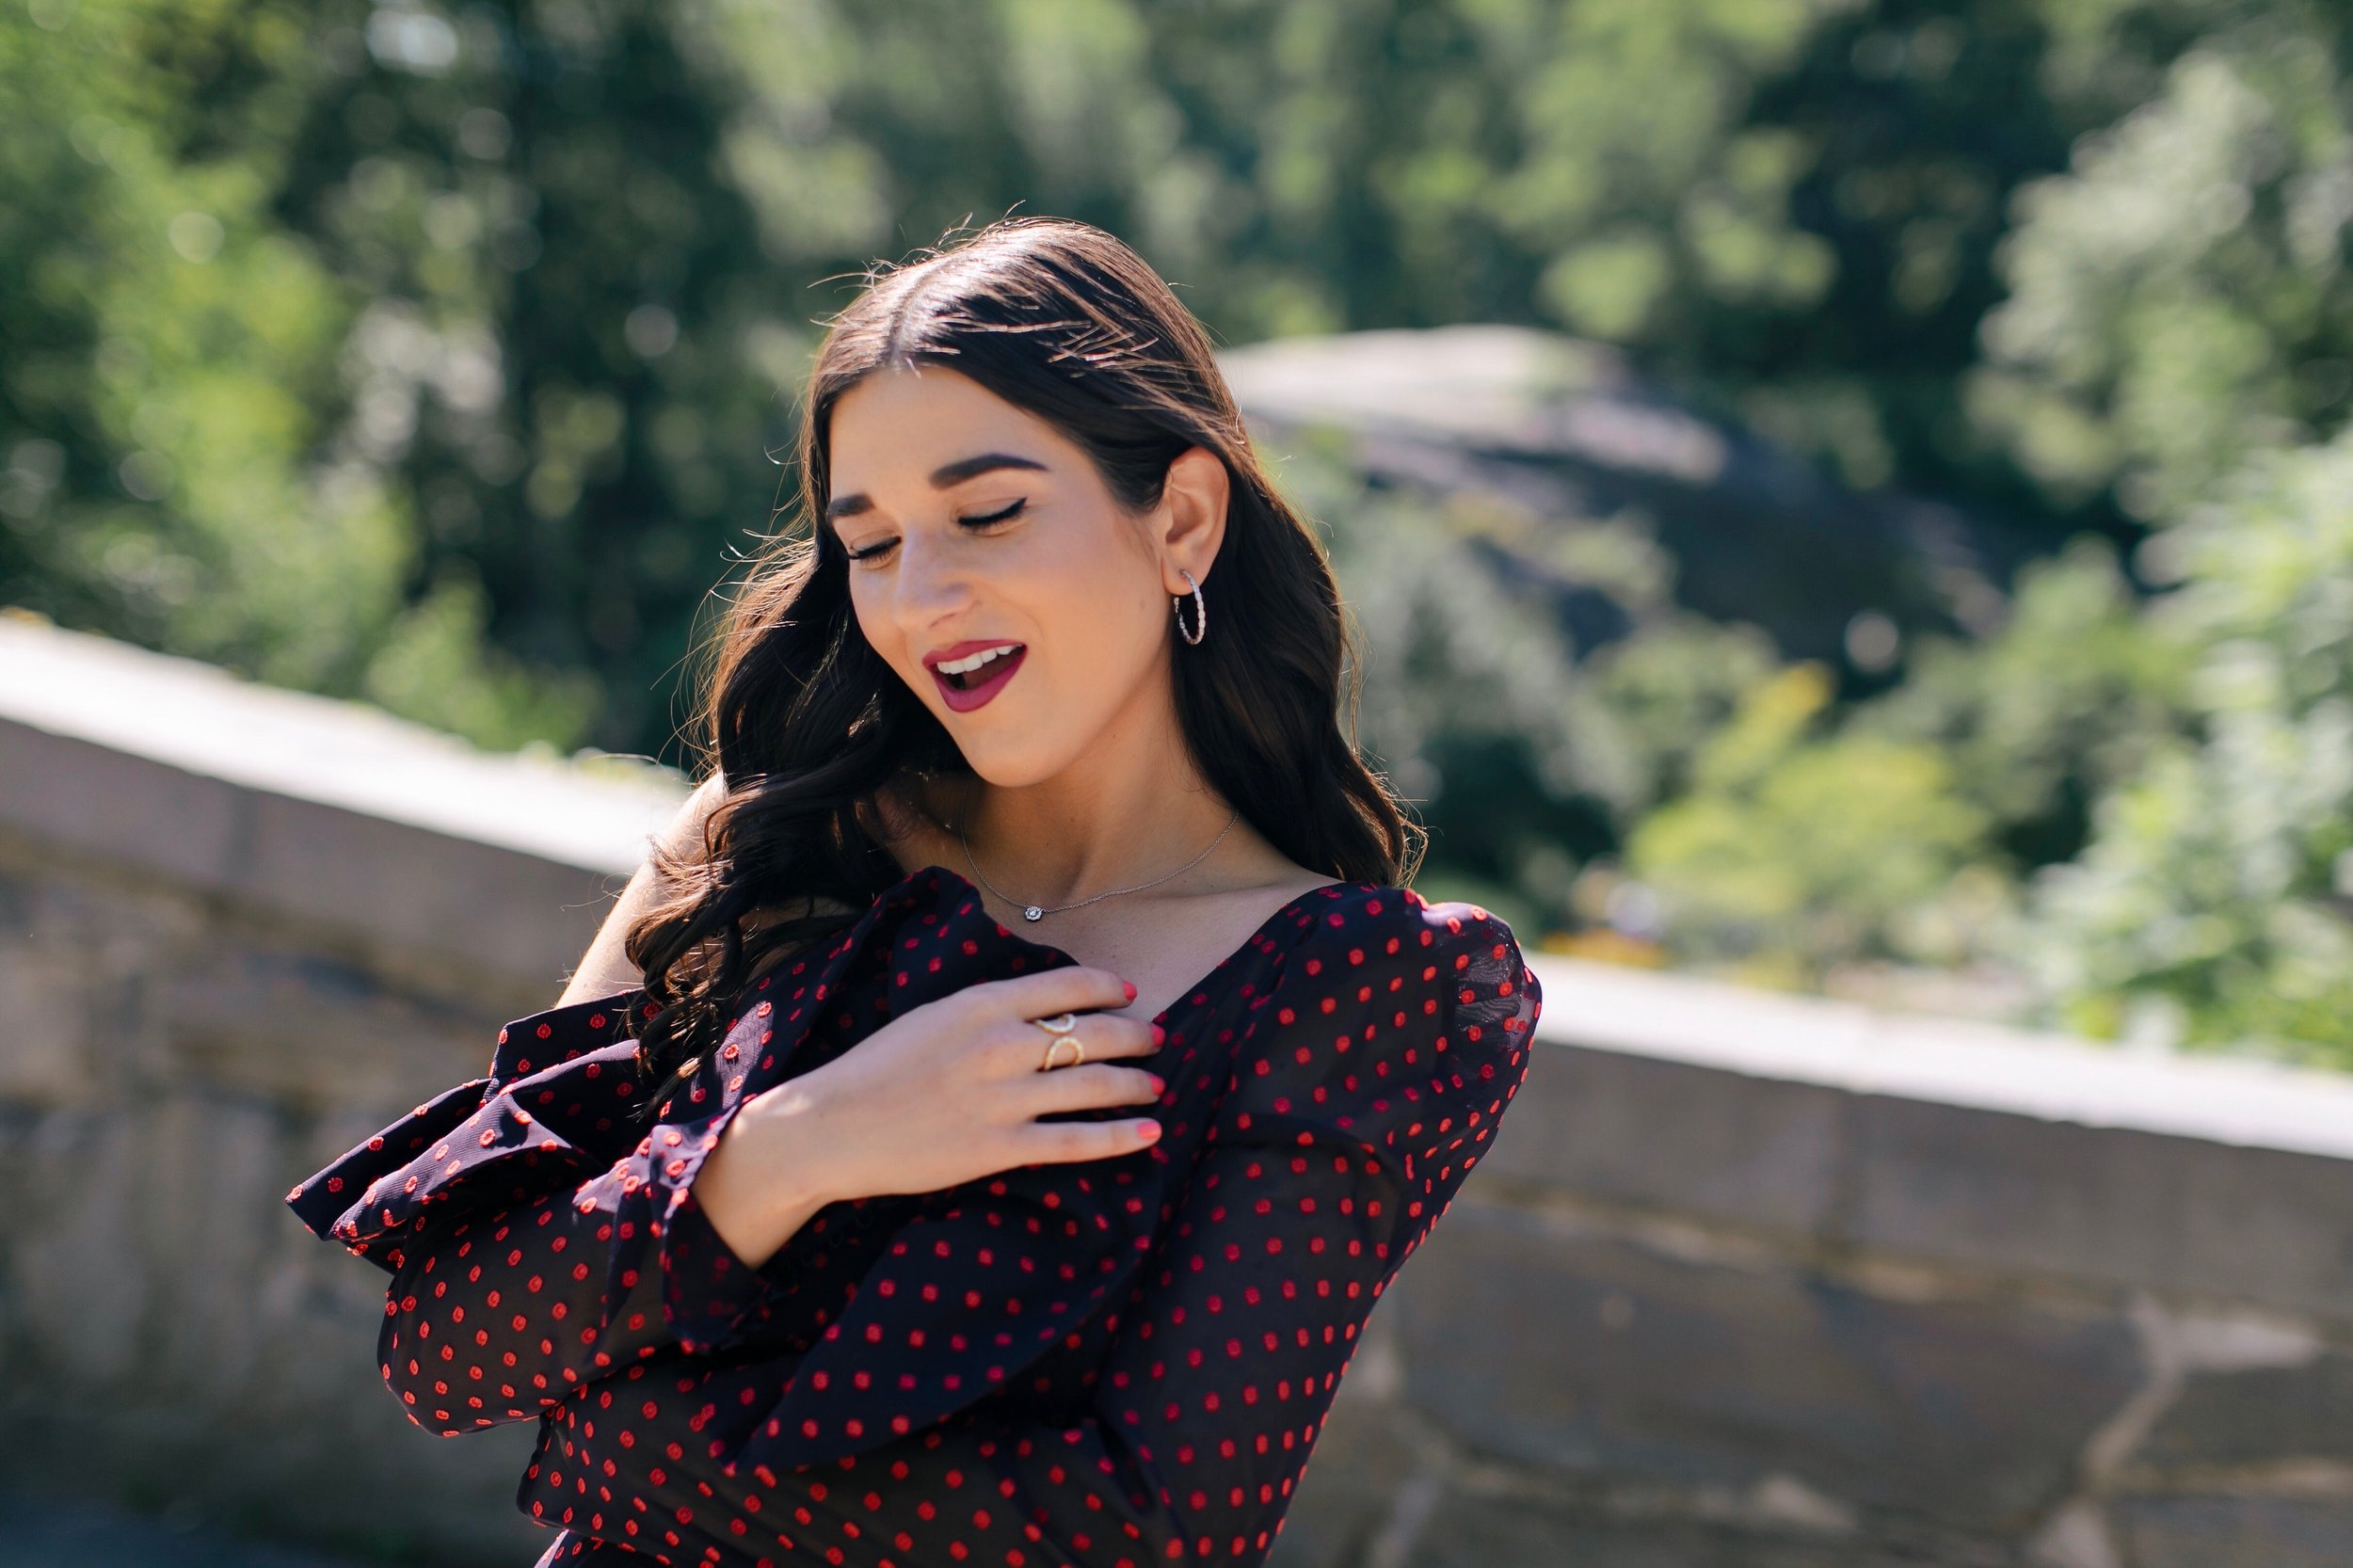 Decked Out In Diamonds Hearts On Fire Esther Santer NYC Street Style Blogger Outfit Self Portrait Necklace Ring Earrings Pretty Beautiful Perfect Cut Outfit Polka Dot Print Photoshoot Central Park New York City Lipstick Girl Women Wear Shopping Luxury.jpg